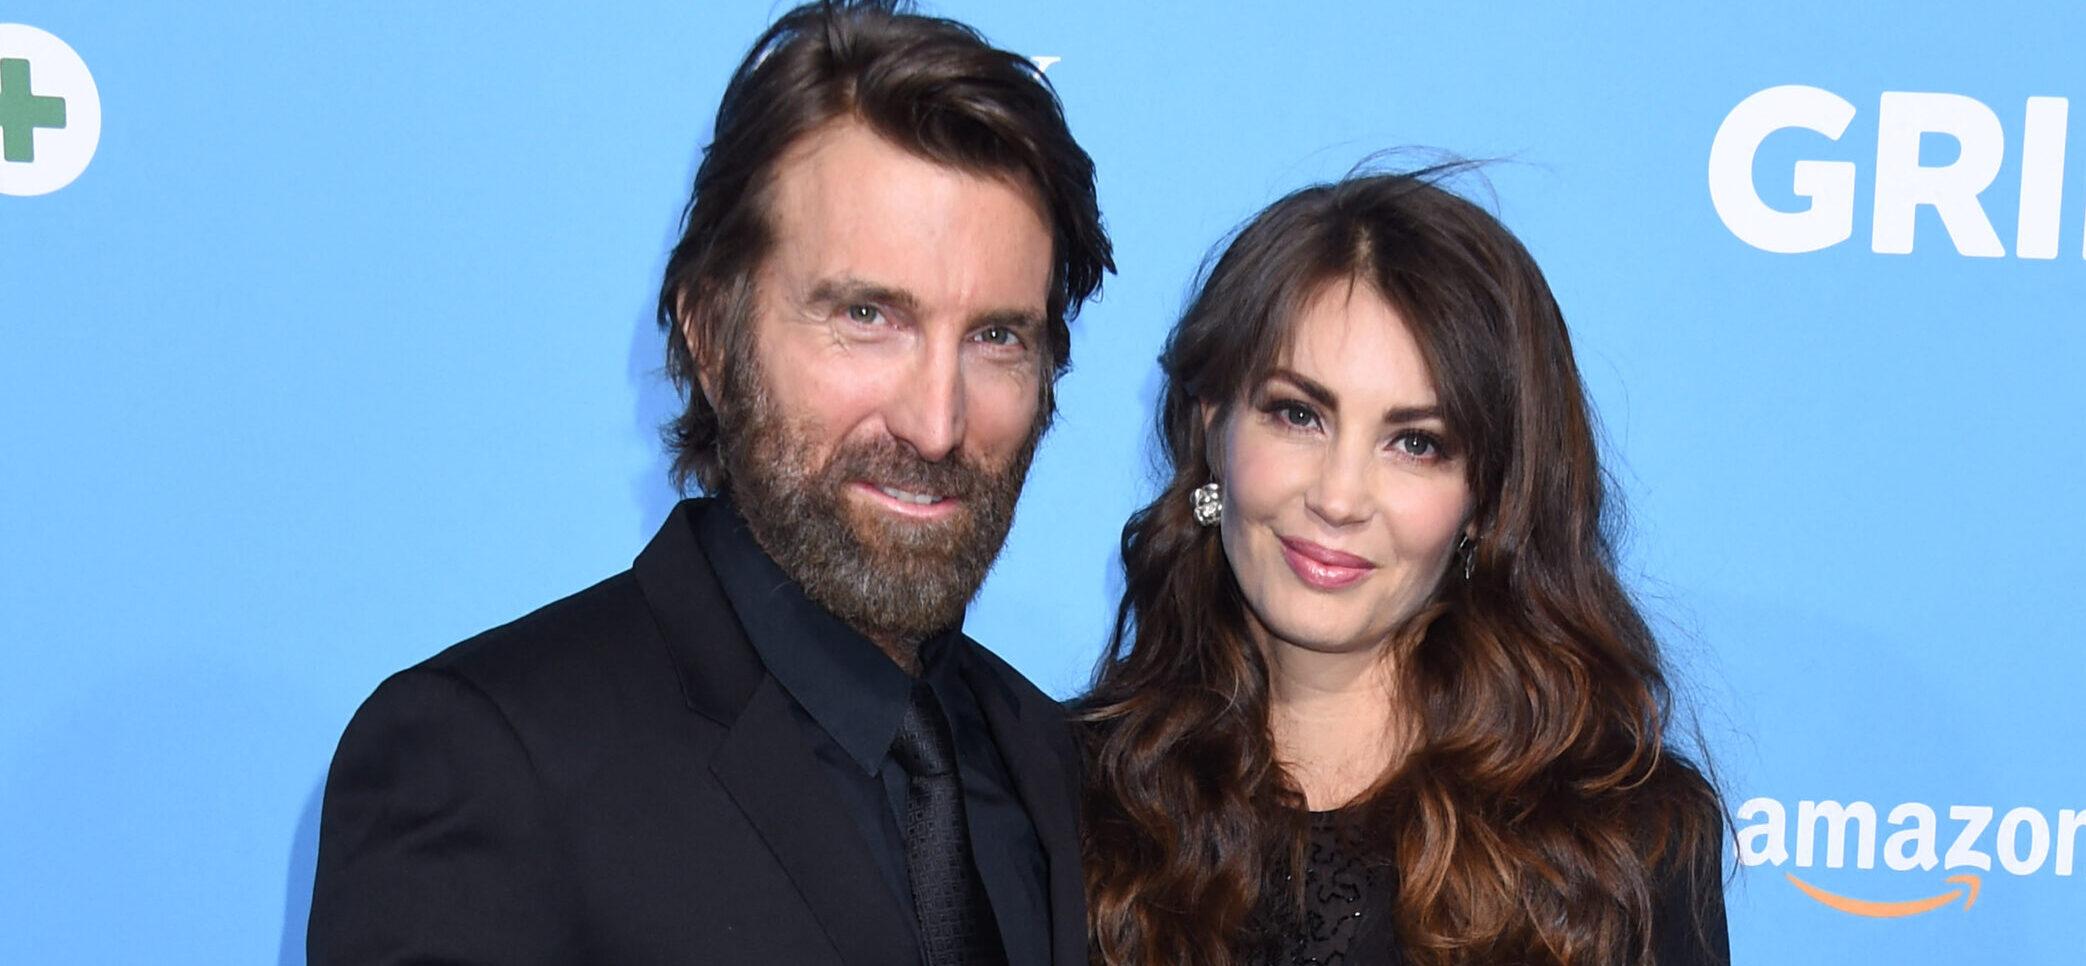 ‘District 9’ Star Sharlto Copley Files For Divorce From Model Wife Tanit Phoenix